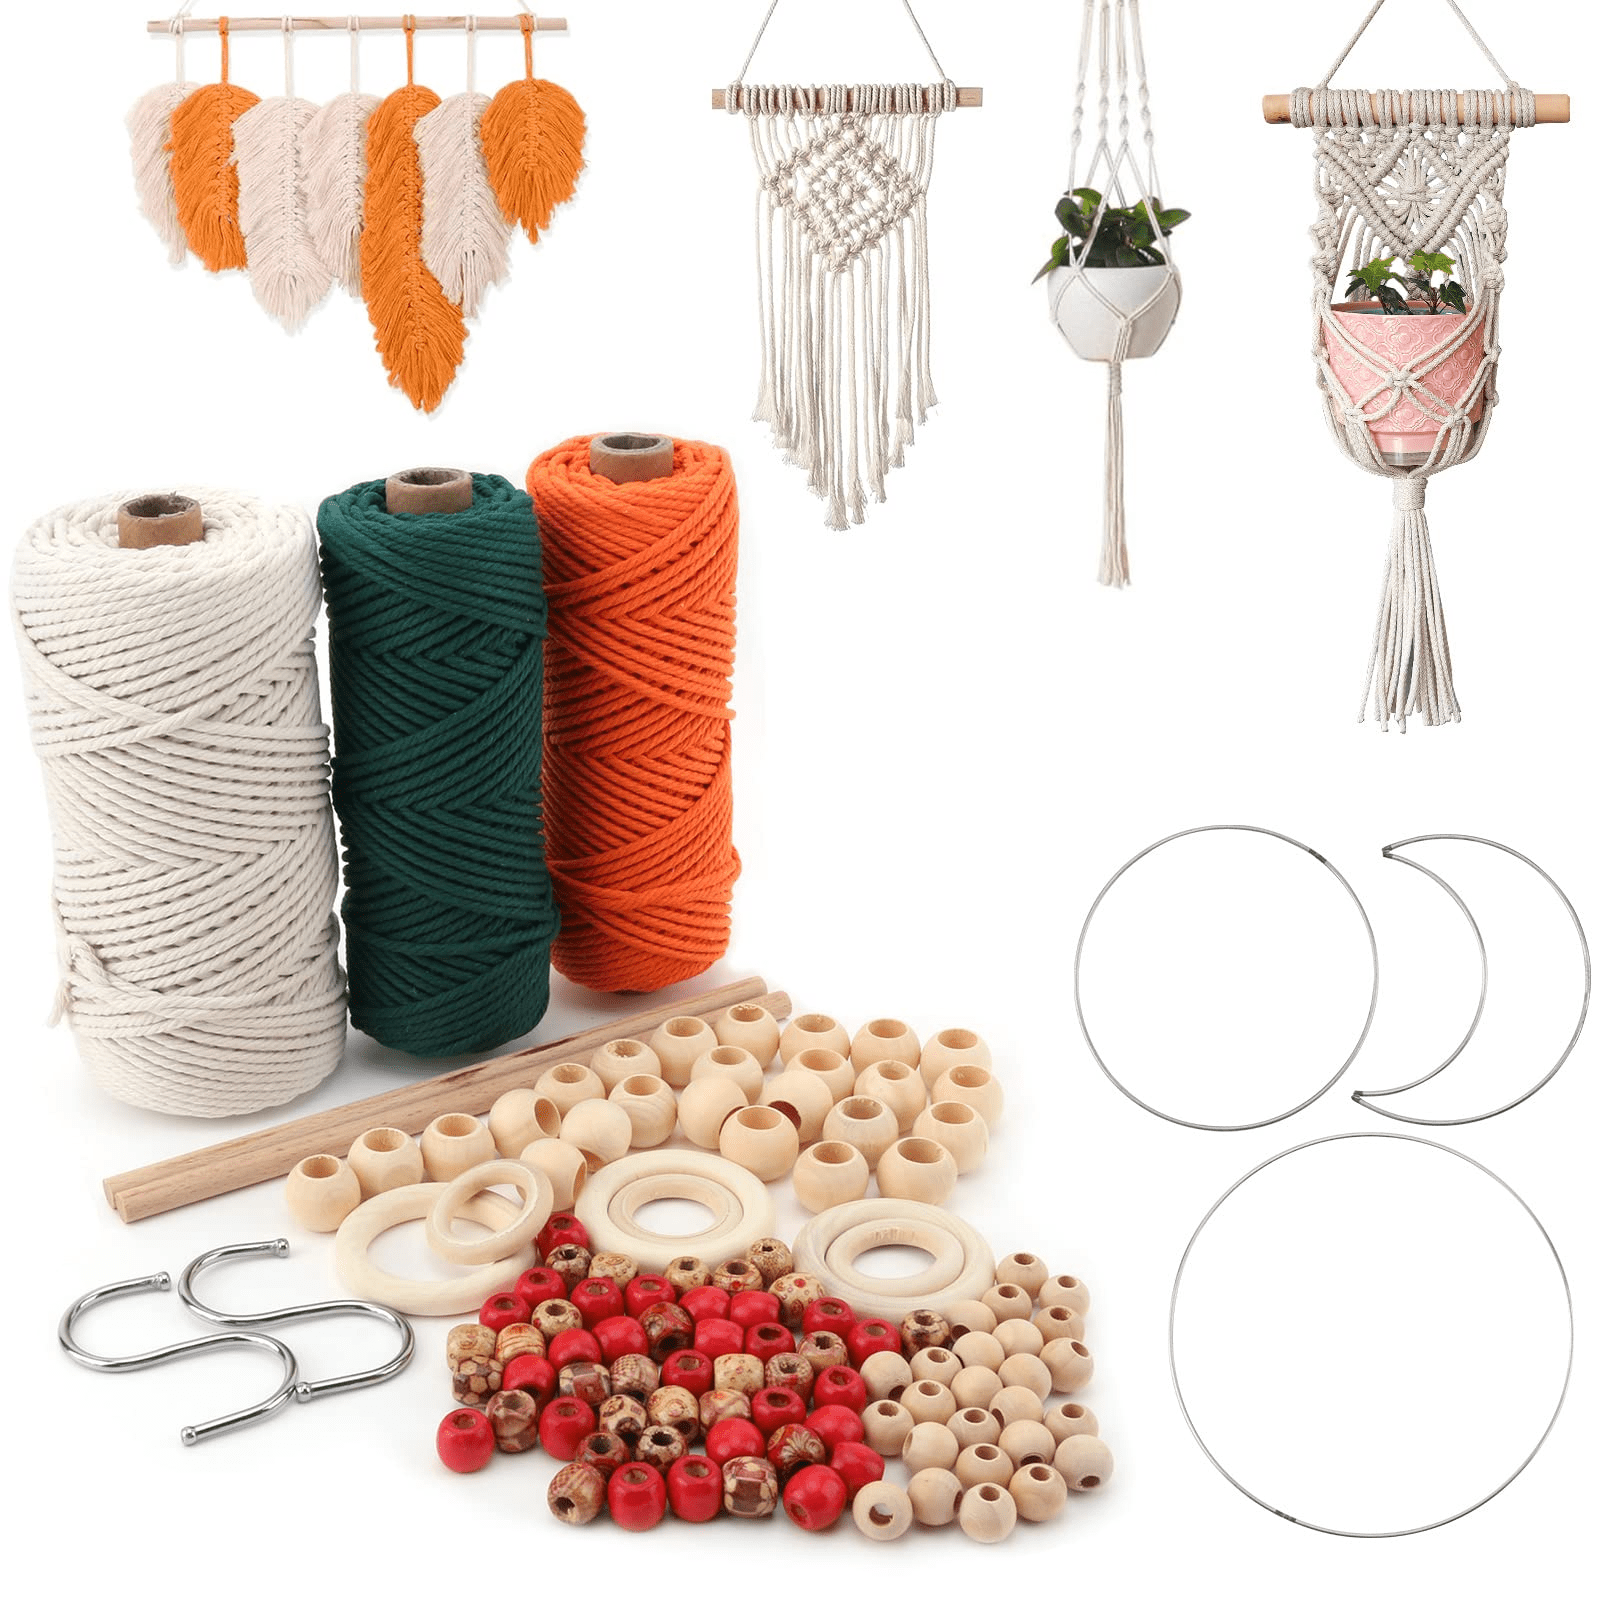 Macrame Supplies Kit with 300 Yards 3mm Cord, Wood Beads, Rings, and Sticks  (67 Pieces), PACK - Kroger